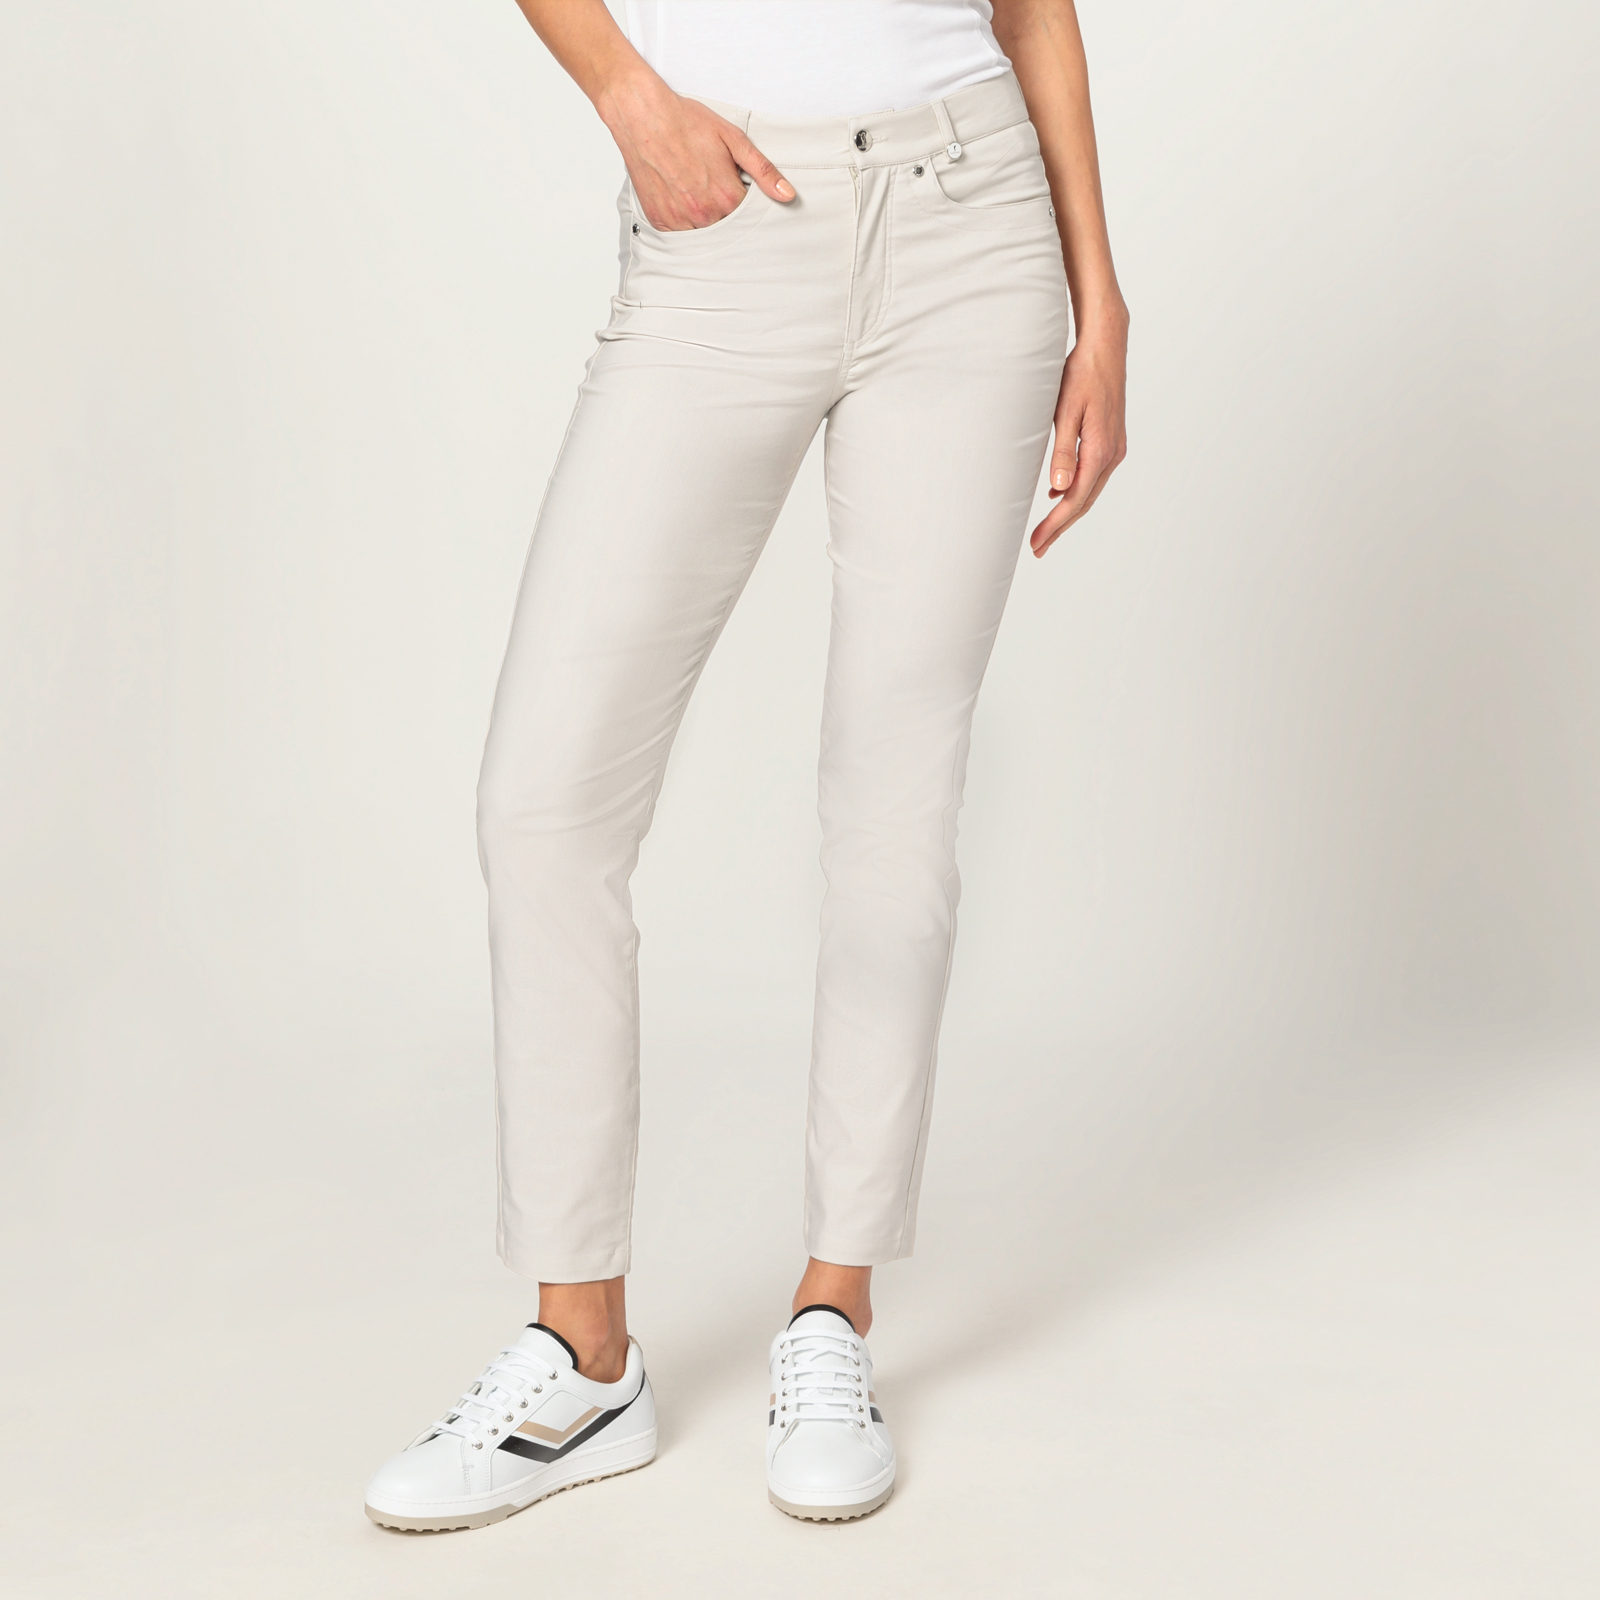 Ladies' 7/8 pants in 5-pocket style made from stretch material with sun protection function